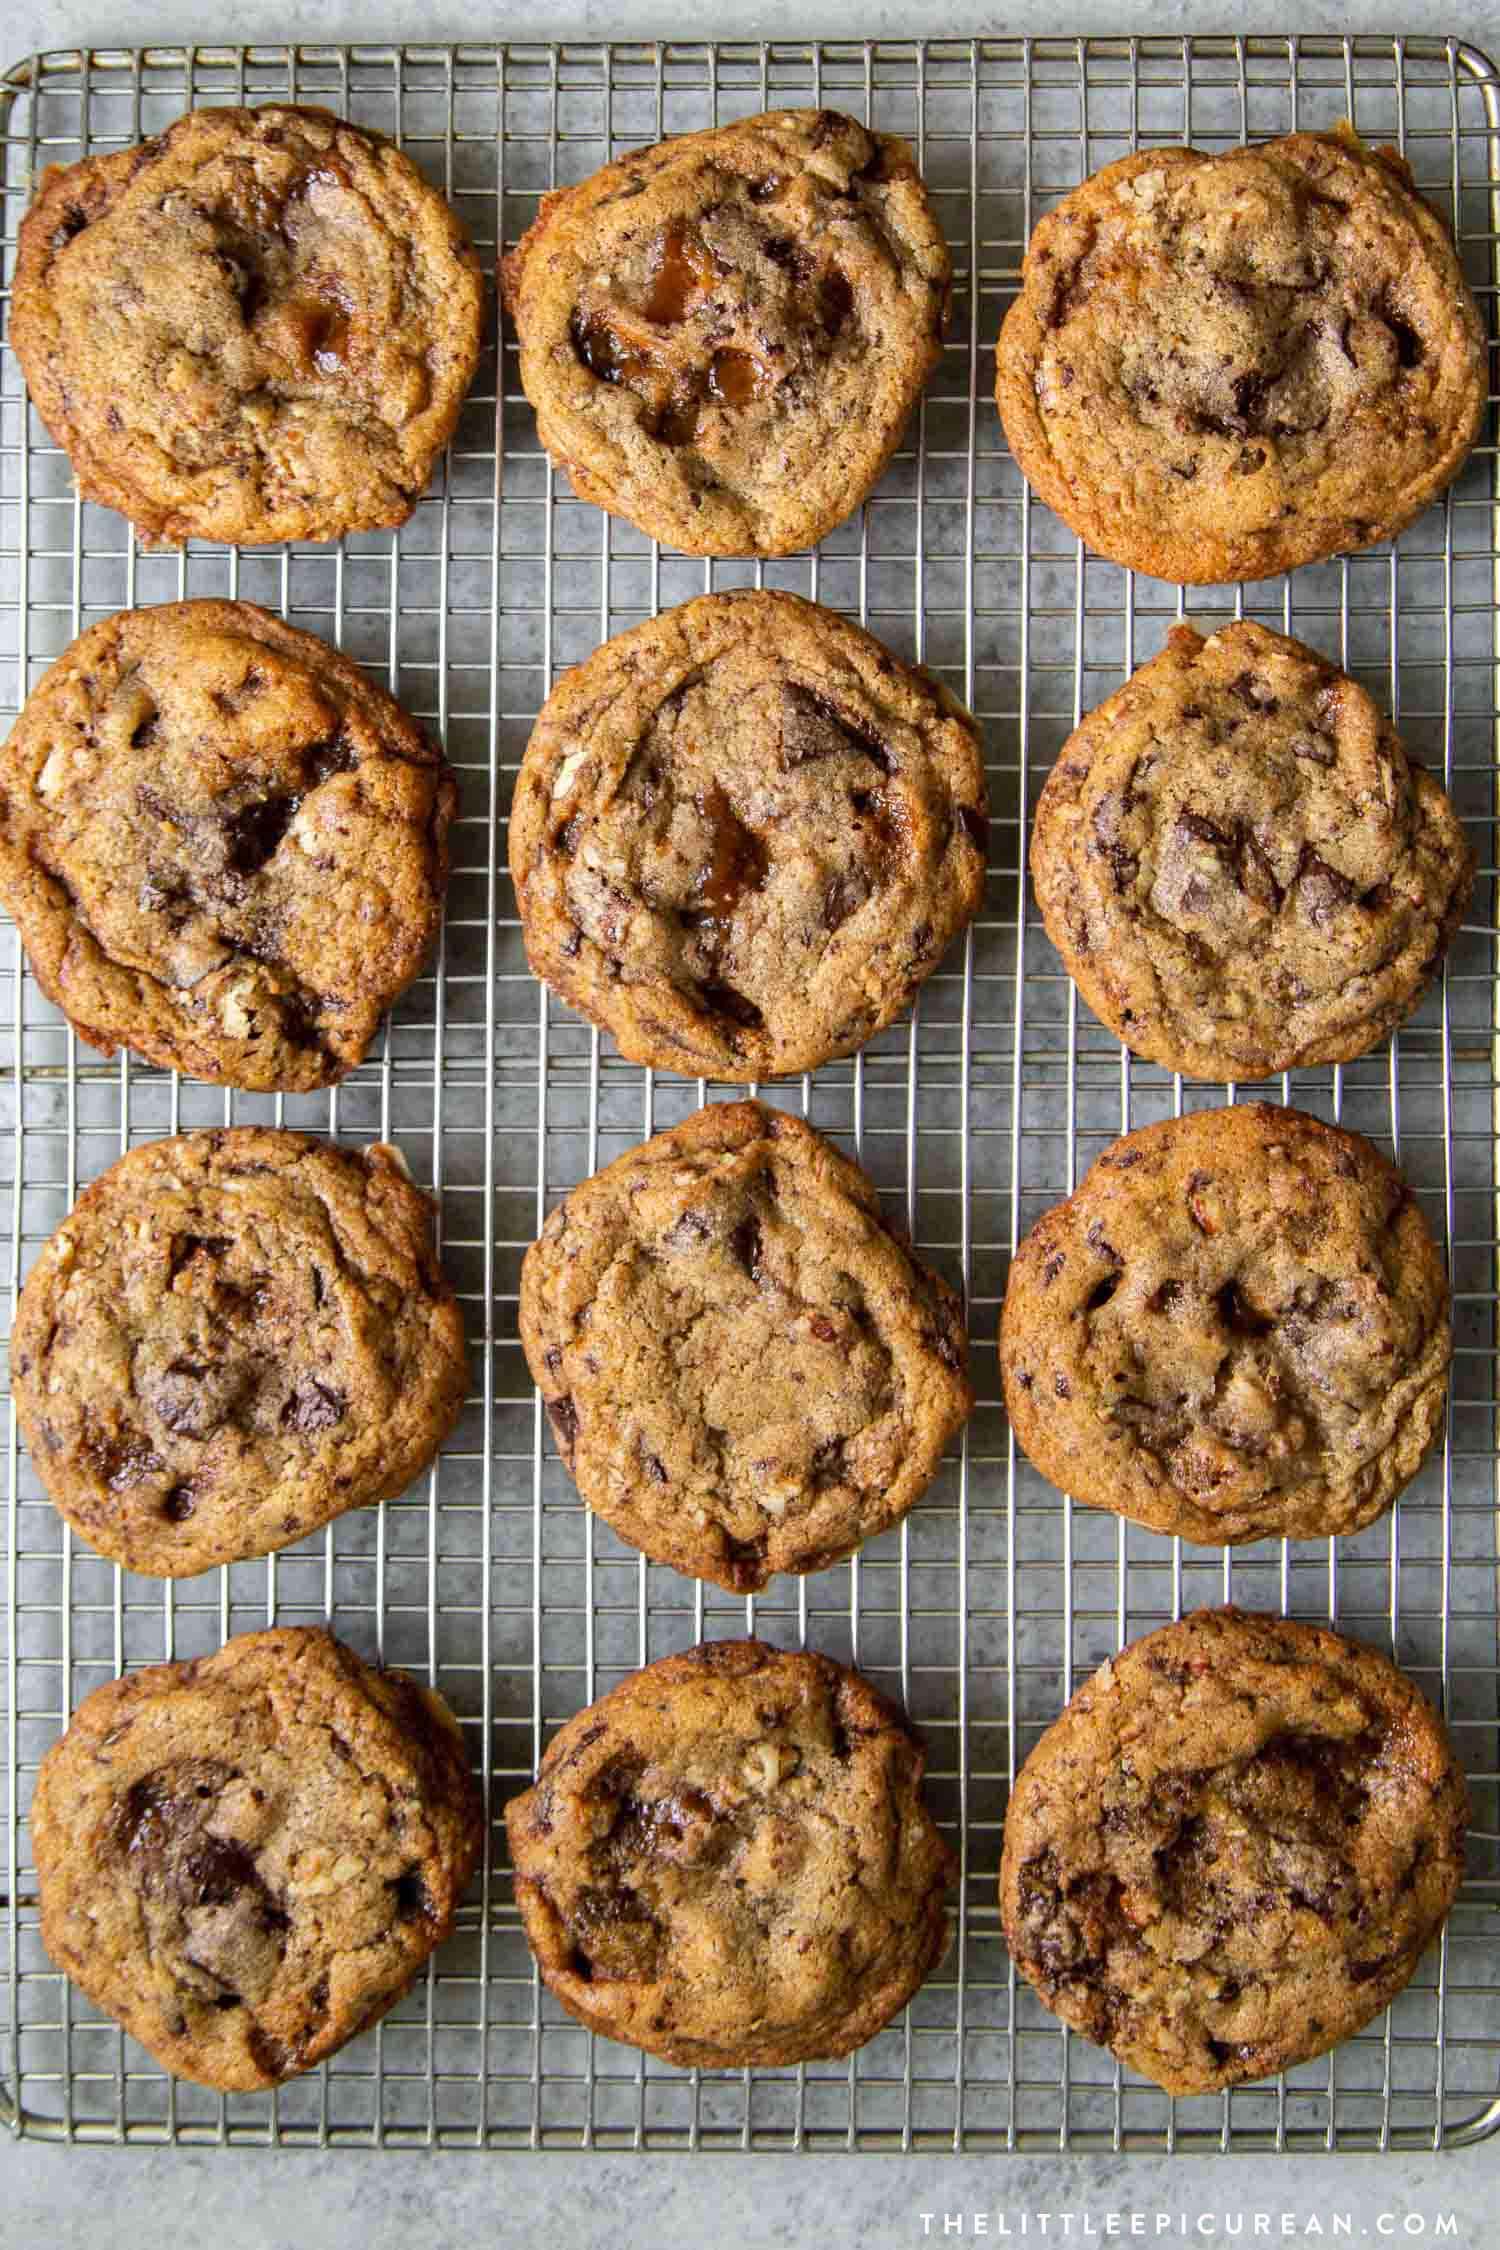 Pecan Toffee Chocolate Chunk Cookies. These soft and chewy cookies are loaded with flavor. They remain chewy even days after baking! #cookies #holidaycookies #cookieexchange #recipe #chocolate #toffee #dessert